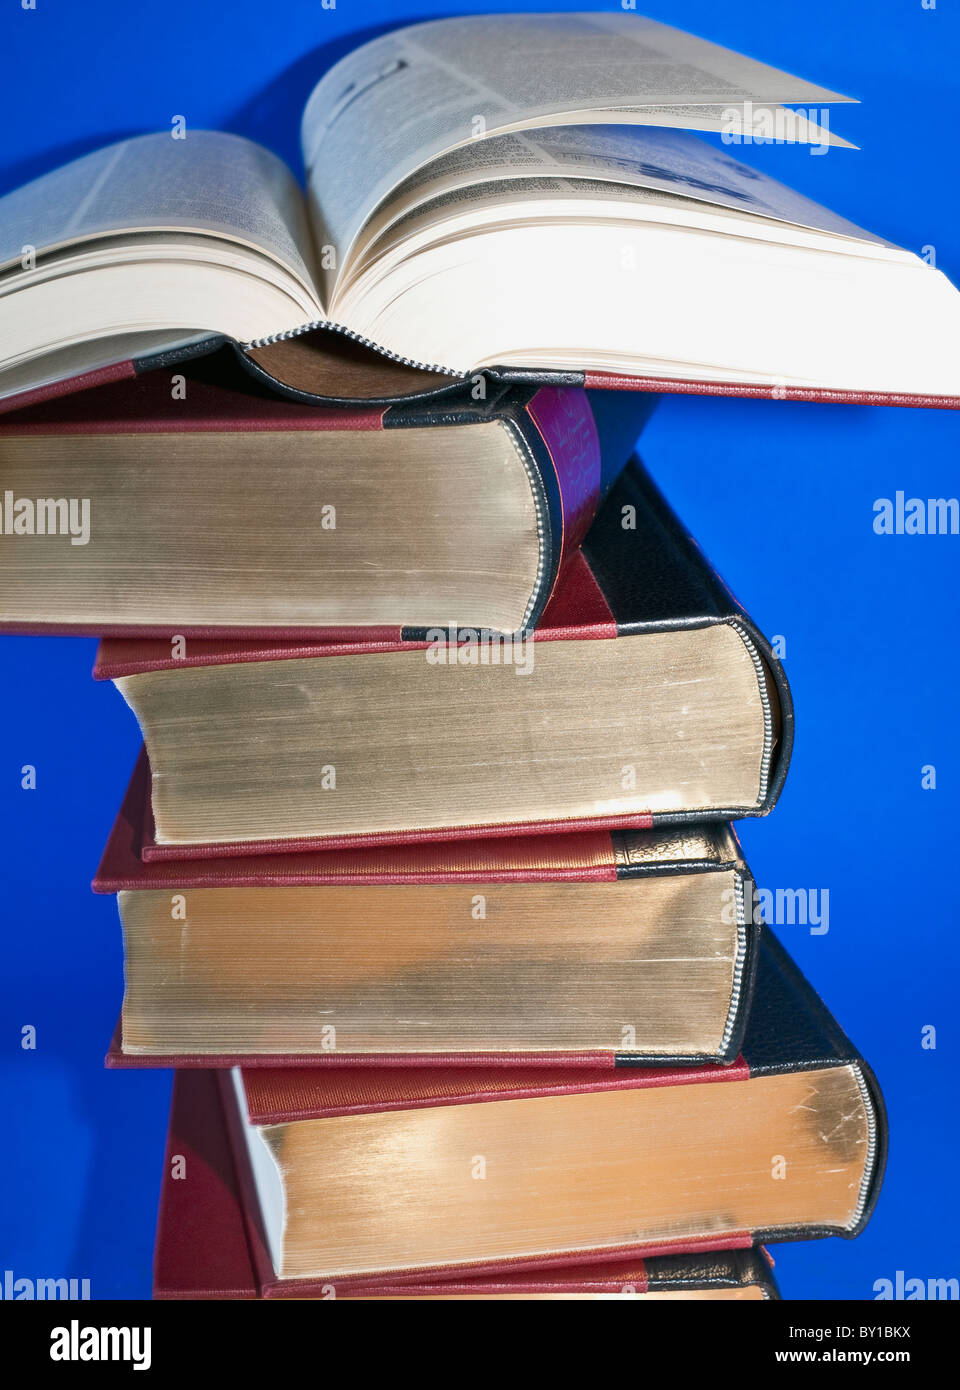 Books piled on top of each other Stock Photo